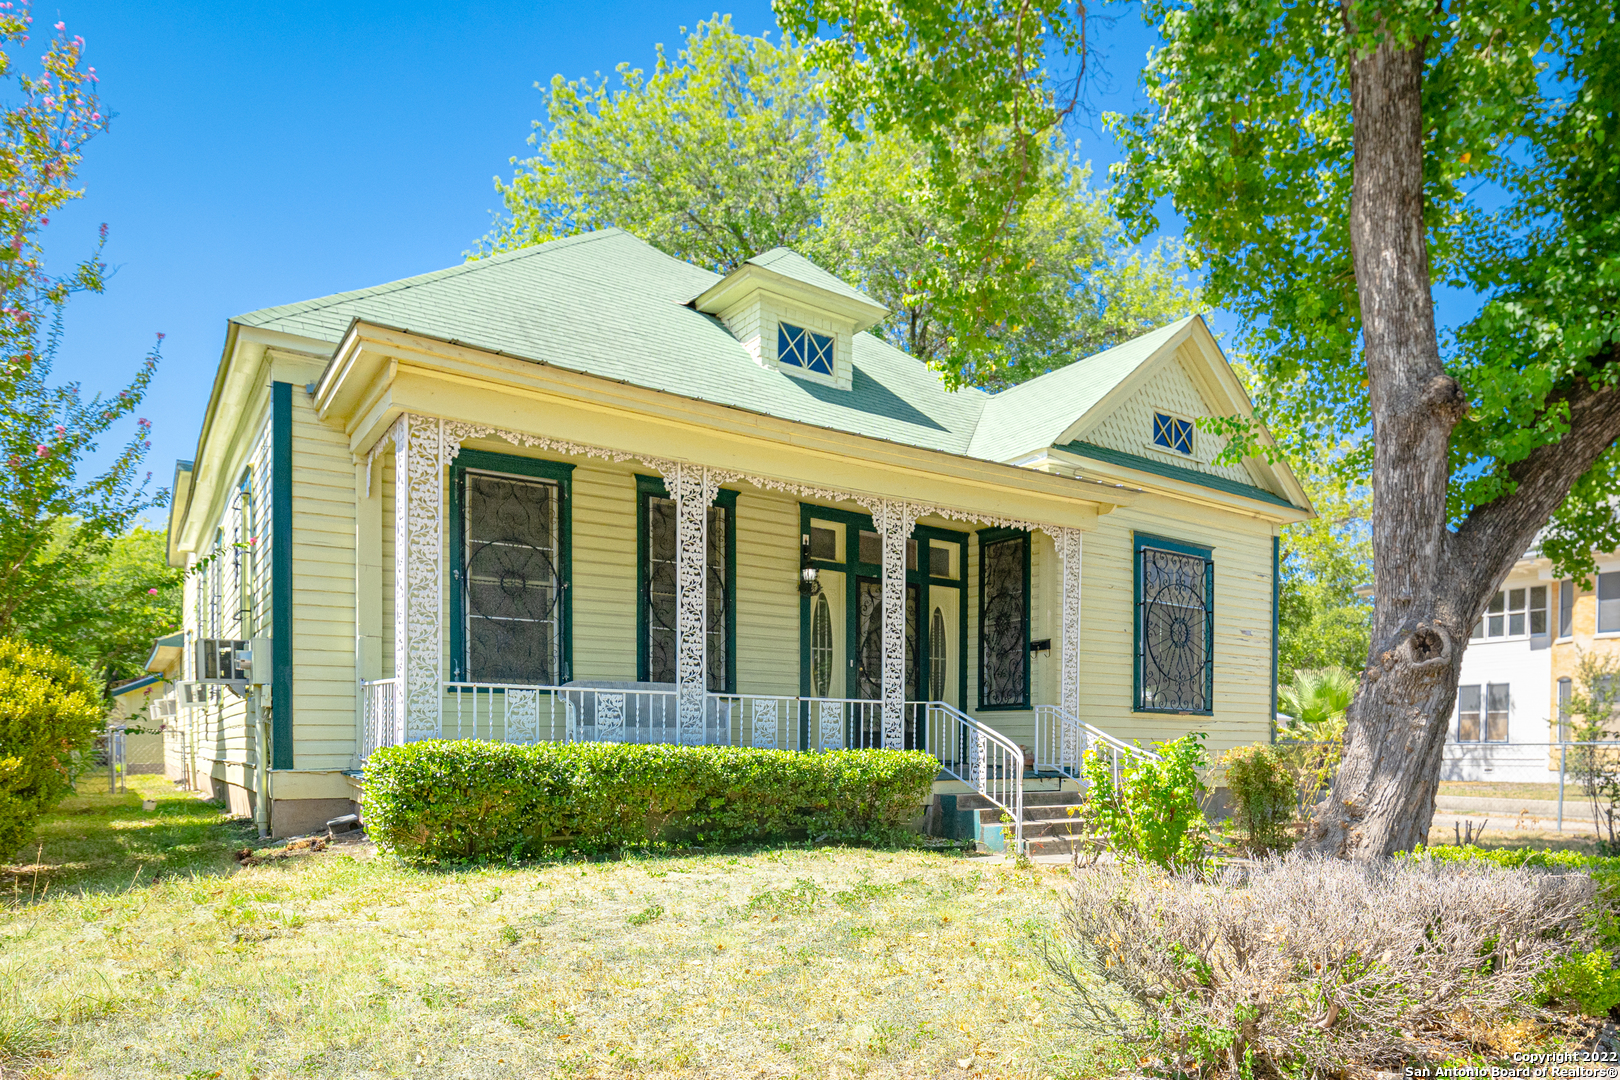 This three bedroom/ two bath, 1910 classical revival sits on a .18 acre corner lot and includes a one bedroom apartment that can serve as a second dwelling, office space or income generator!  VERY RARE FIND!  Welcome to the Historical Lavaca District, situated in San Antonio's most walkable neighborhood.  **302 FLORIDA ST SHOULD BE ELIGIBLE FOR A 20% TAX EXEMPTION FOR 15 YEARS AND TAX CREDITS FOR SUBSTANTIAL REHABILITATION FROM THE CITY'S OFFICE OF HISTORIC PRESERVATION**!   The detached 2-car garage on a concrete slab can also be easily converted into a third dwelling.  Children will benefit from SAISD's Alamo Promise that provides 60 hrs of college tuition to any Alamo Community College. The bike/walkability to downtown's Southtown and Lone Star Districts, Hemisfair Park, Alamodome, local nightlife and annual festivals are inviting.  Priced $100k below newly remodeled homes, this bungalow awaits a special owner who's looking to add their own style while living in the neighborhood's historic charm.  Own your piece of San Antonio history and schedule your visit today, will not last.  ****    As one of San Antonio's first neighborhoods, Lavaca was established by Mayor Samuel Maverick and Thomas Devine.  It developed alongside its famous sister neighborhood, King William District.  As electricity, water and gas became available in the early 1900's, Lavaca thrived with residential and commercial developments.  Today, many of the homes in downtown Lavaca are officially designated landmarks.